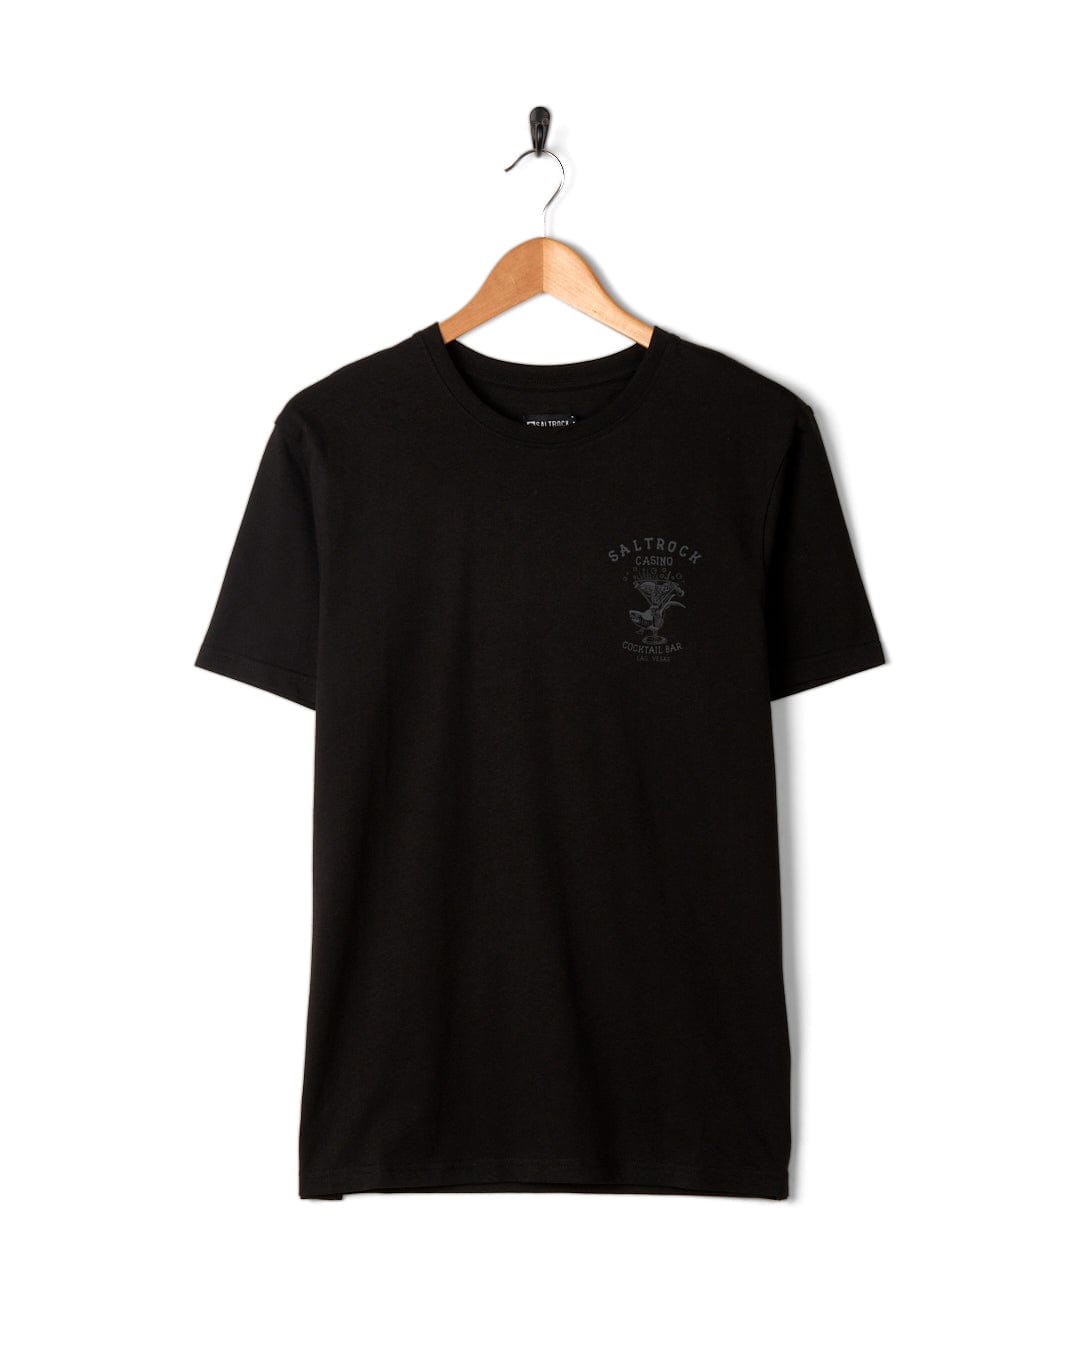 A Saltrock Vegas Cocktail - Mens Short Sleeve T-Shirt - Black with a skull on it.